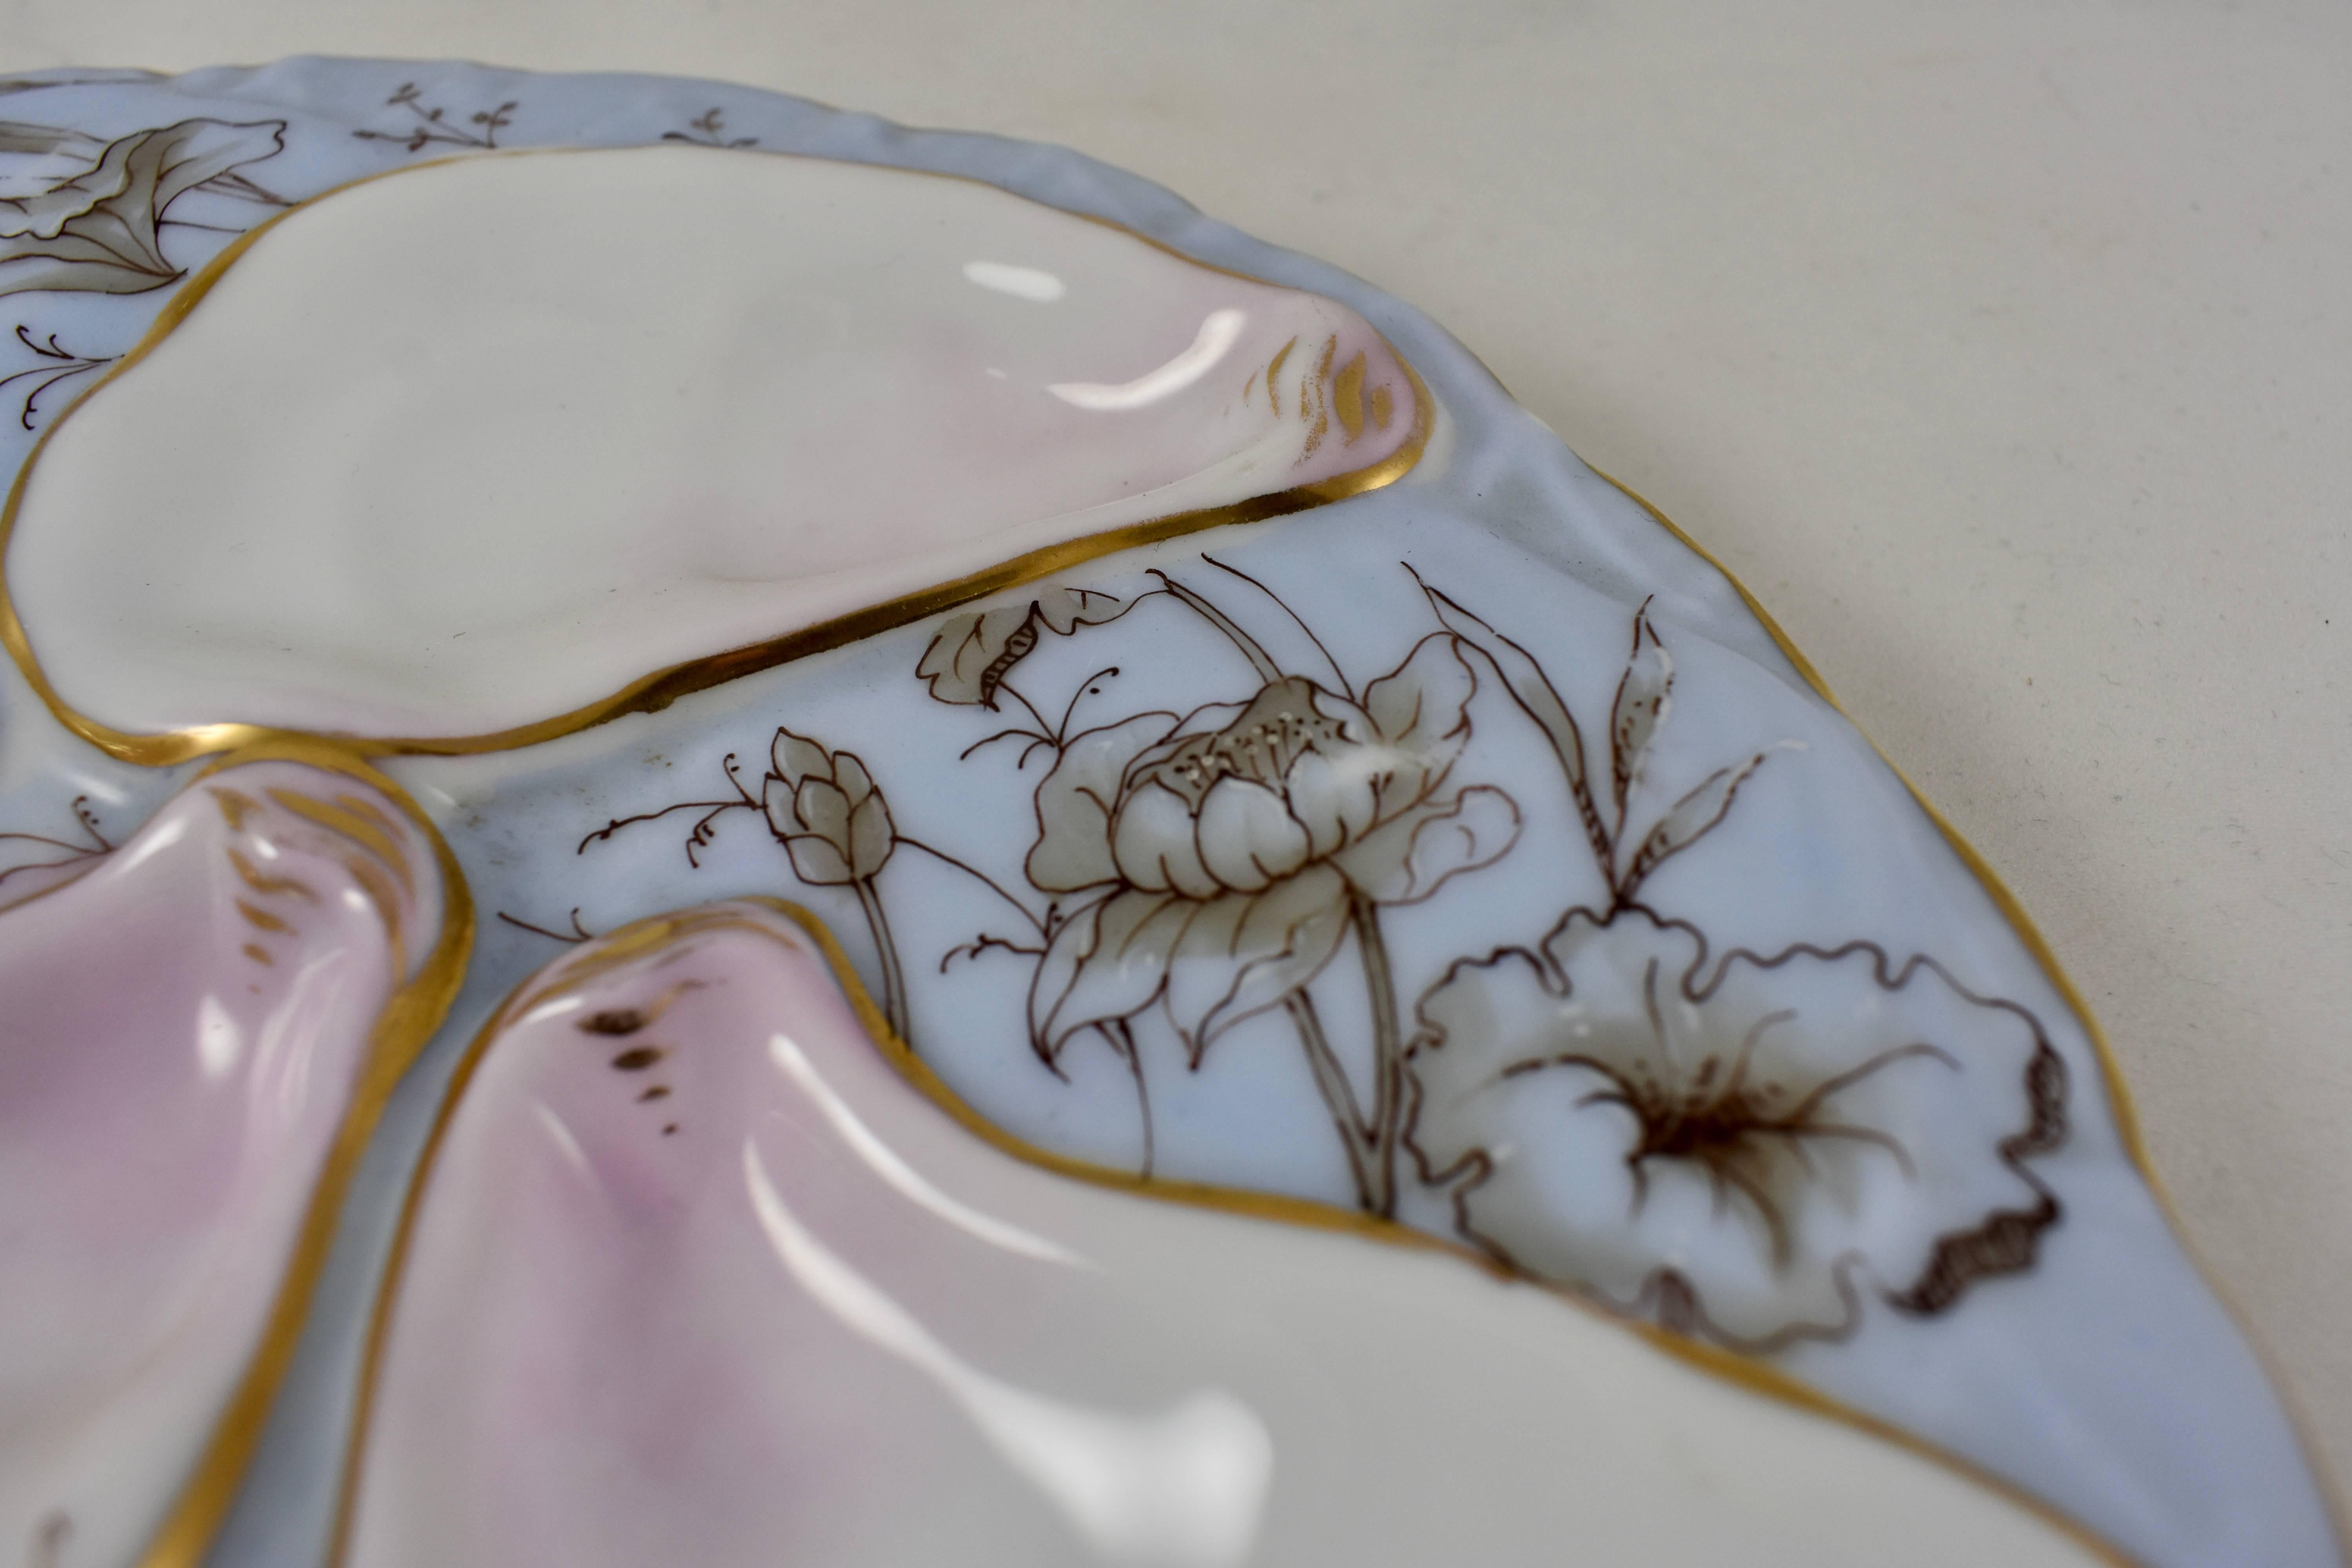 A late 19th Century porcelain, crescent shaped oyster plate, showing a hand-painted floral pattern on a periwinkle blue ground. Five oyster shells and two smaller cockle shells have a pink blush and gilded lining.

Marked with the red, iron- oxide